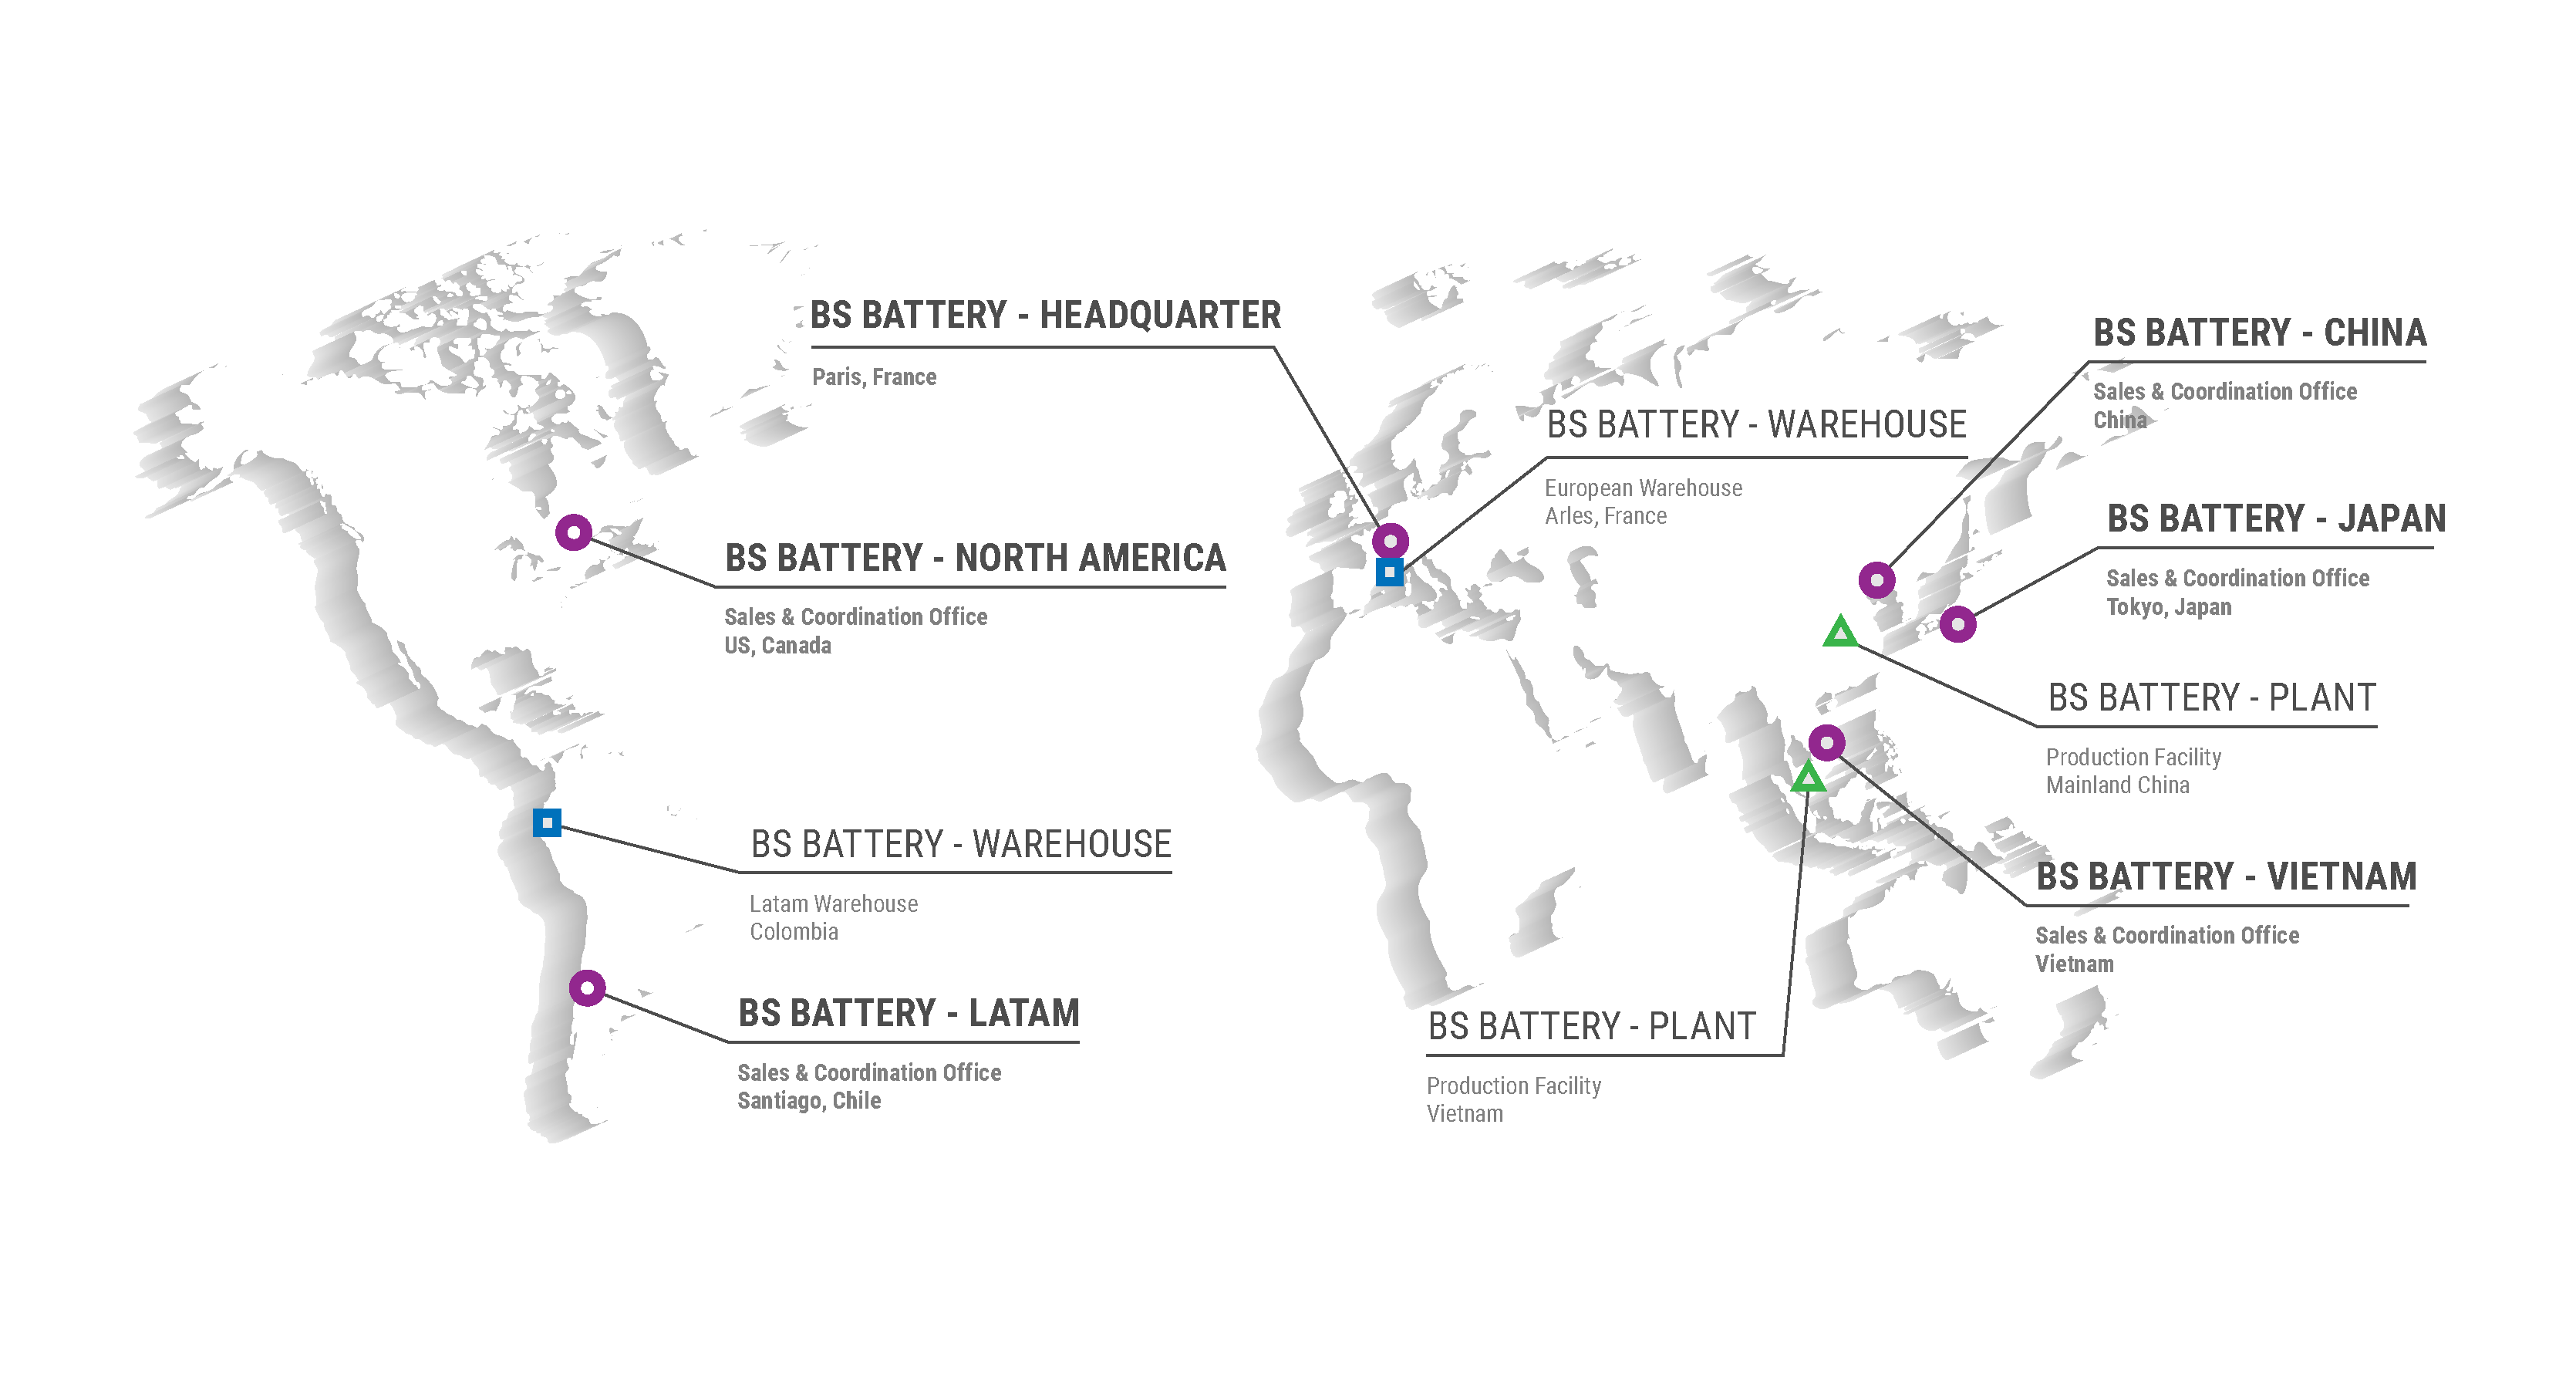 2022 BS BATTERY ABOUT US MAP